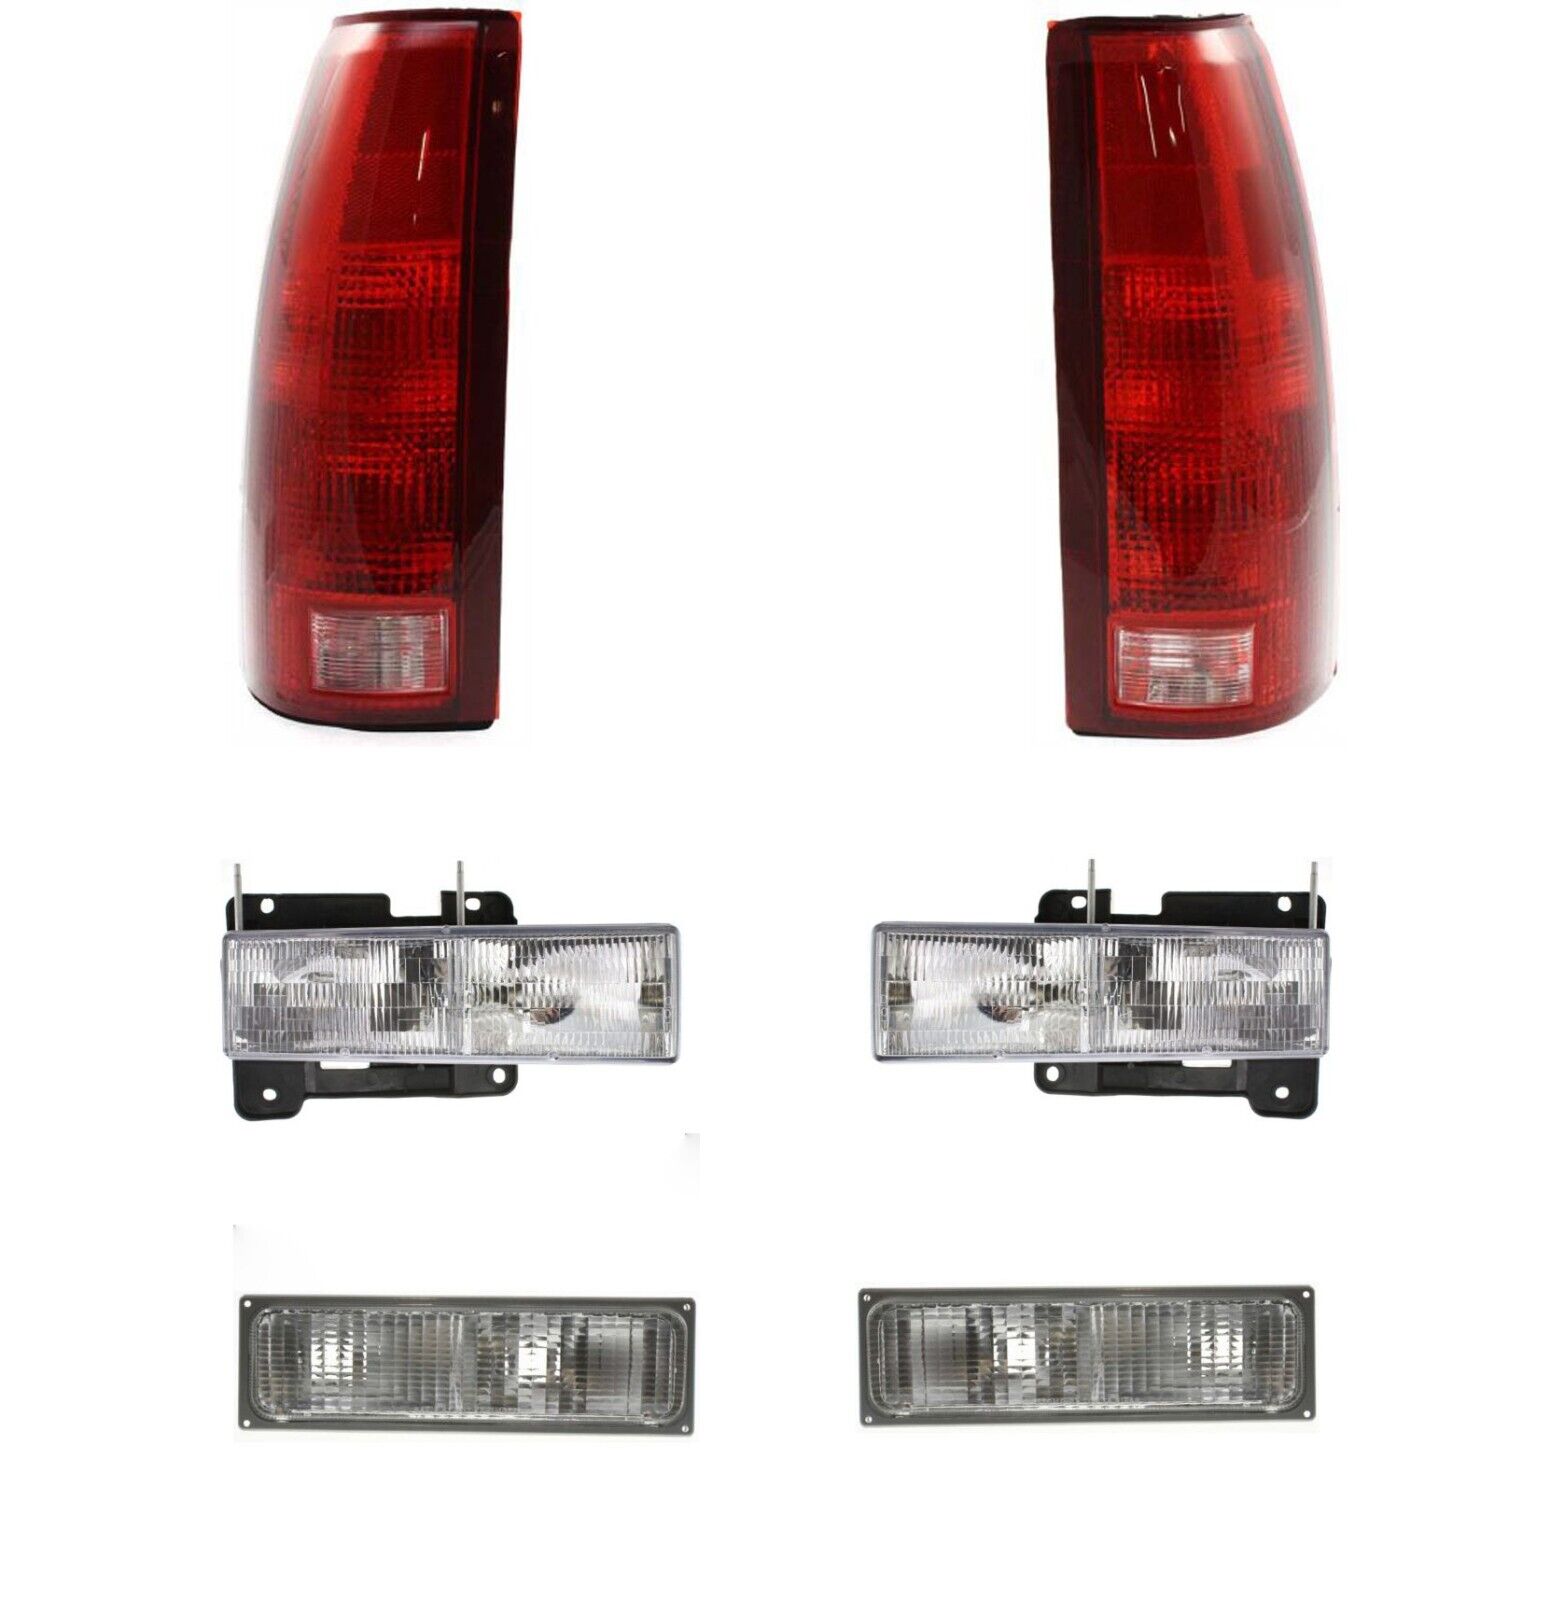 Headlights For 1990-1993 Chevy GMC Truck 92-93 Suburban Turn Signals Tail Lights